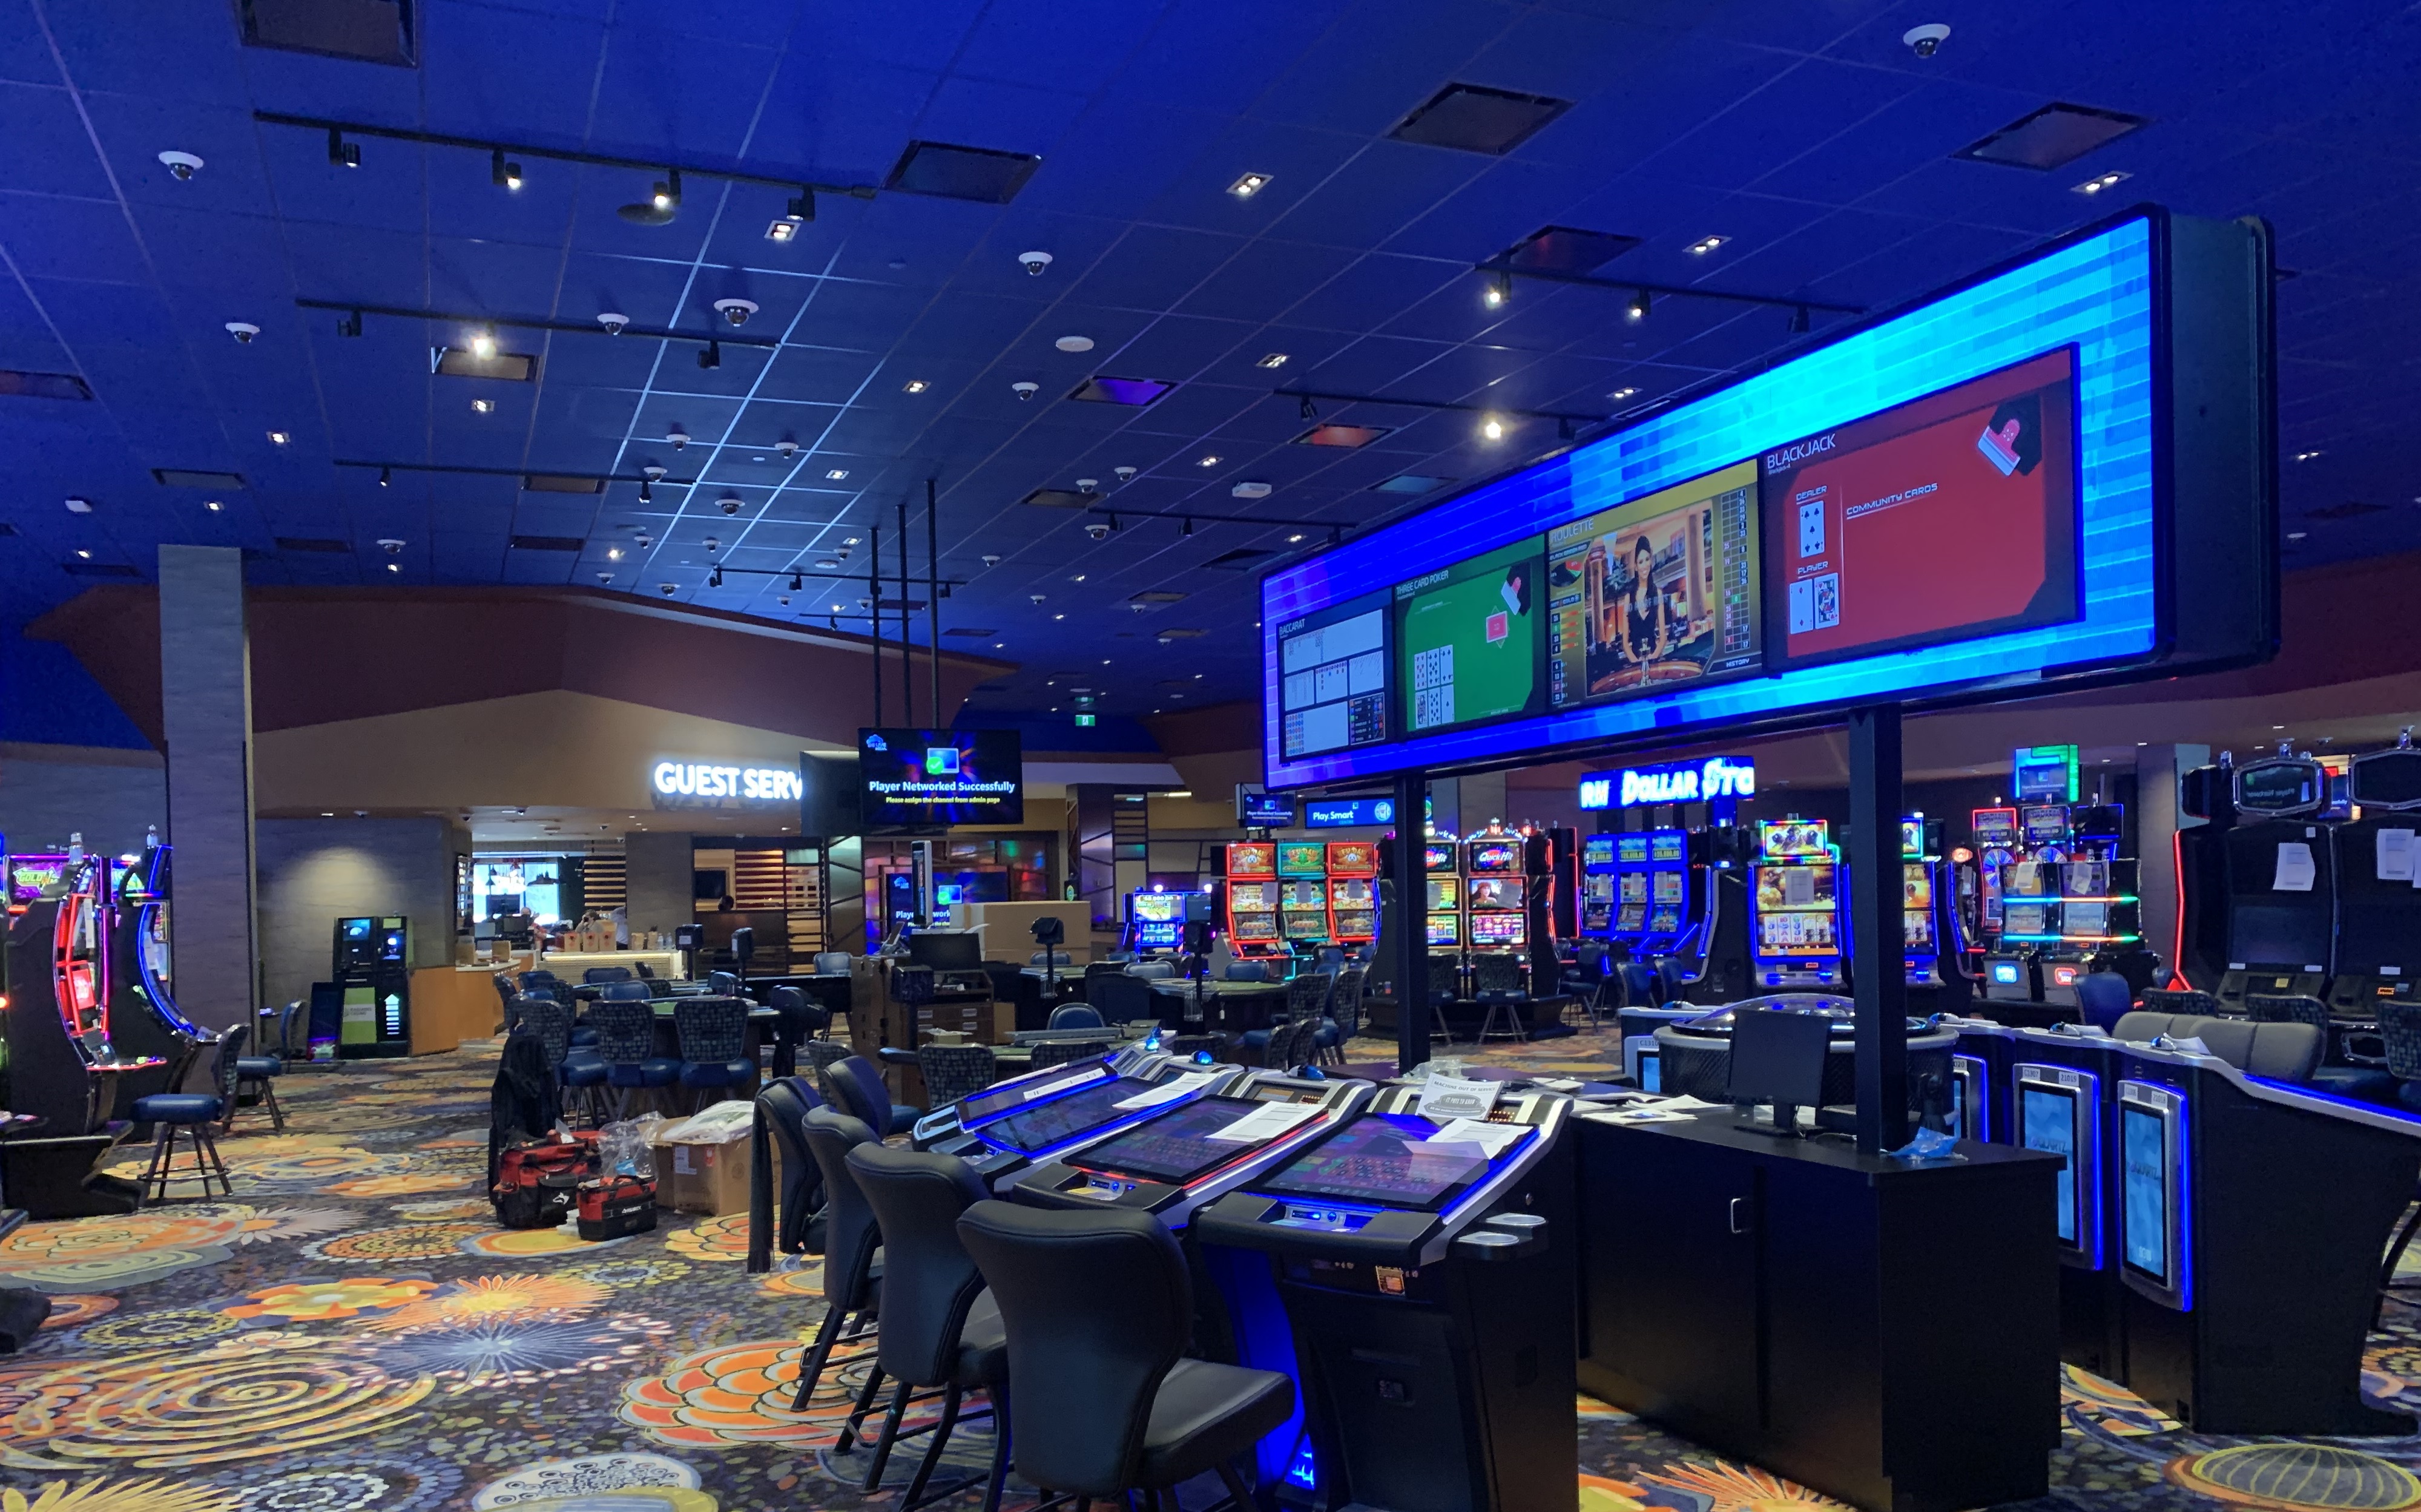 North Bay's new casino opens today - North Bay News